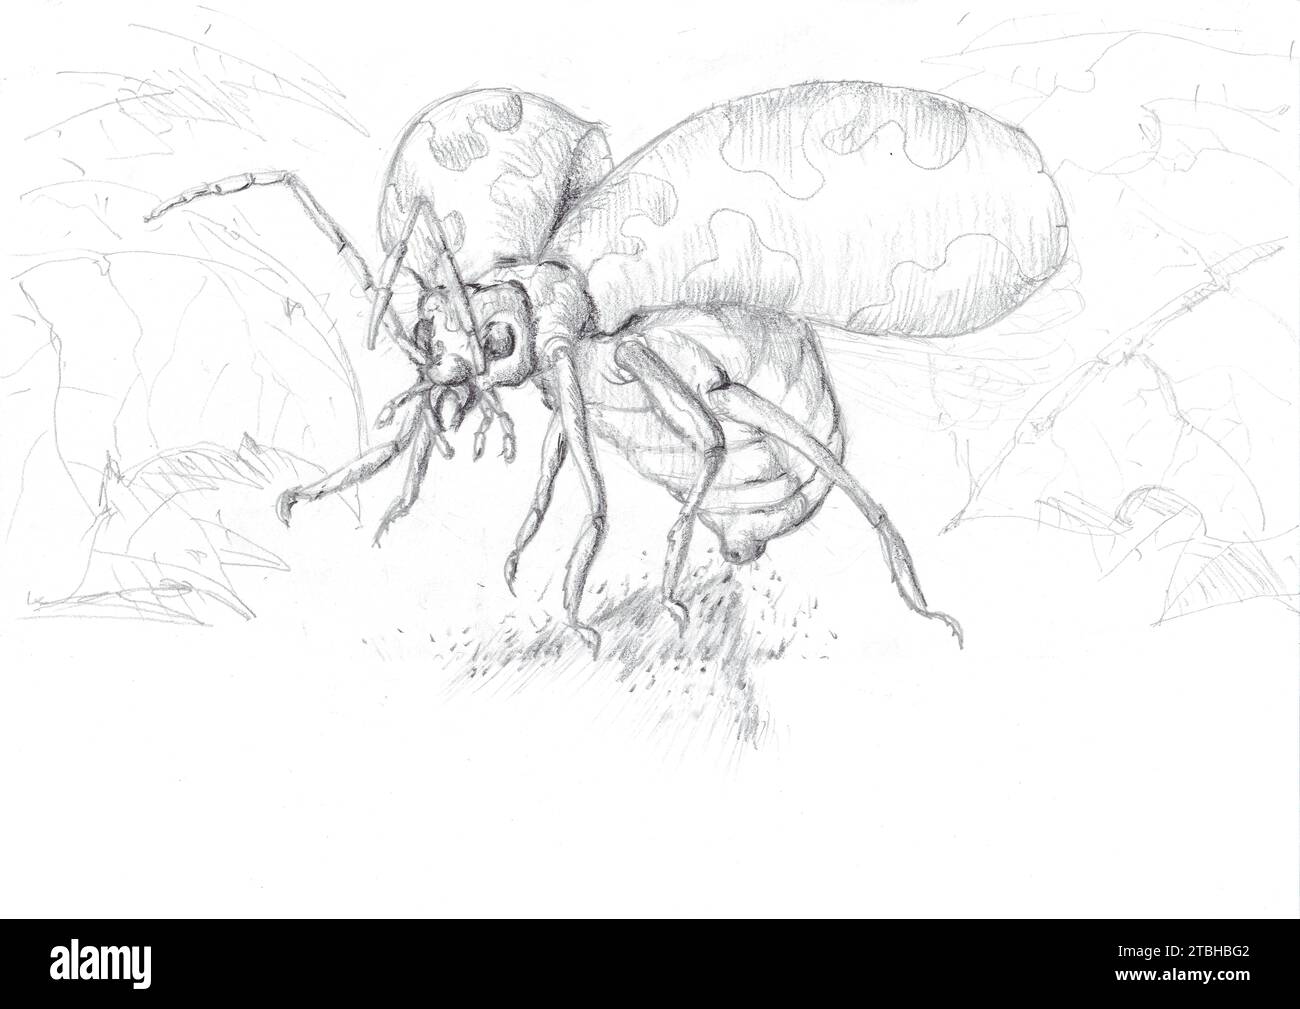 Bombardier beetle flying in action over the forest hub freehand sketch by pencil. Stock Photo